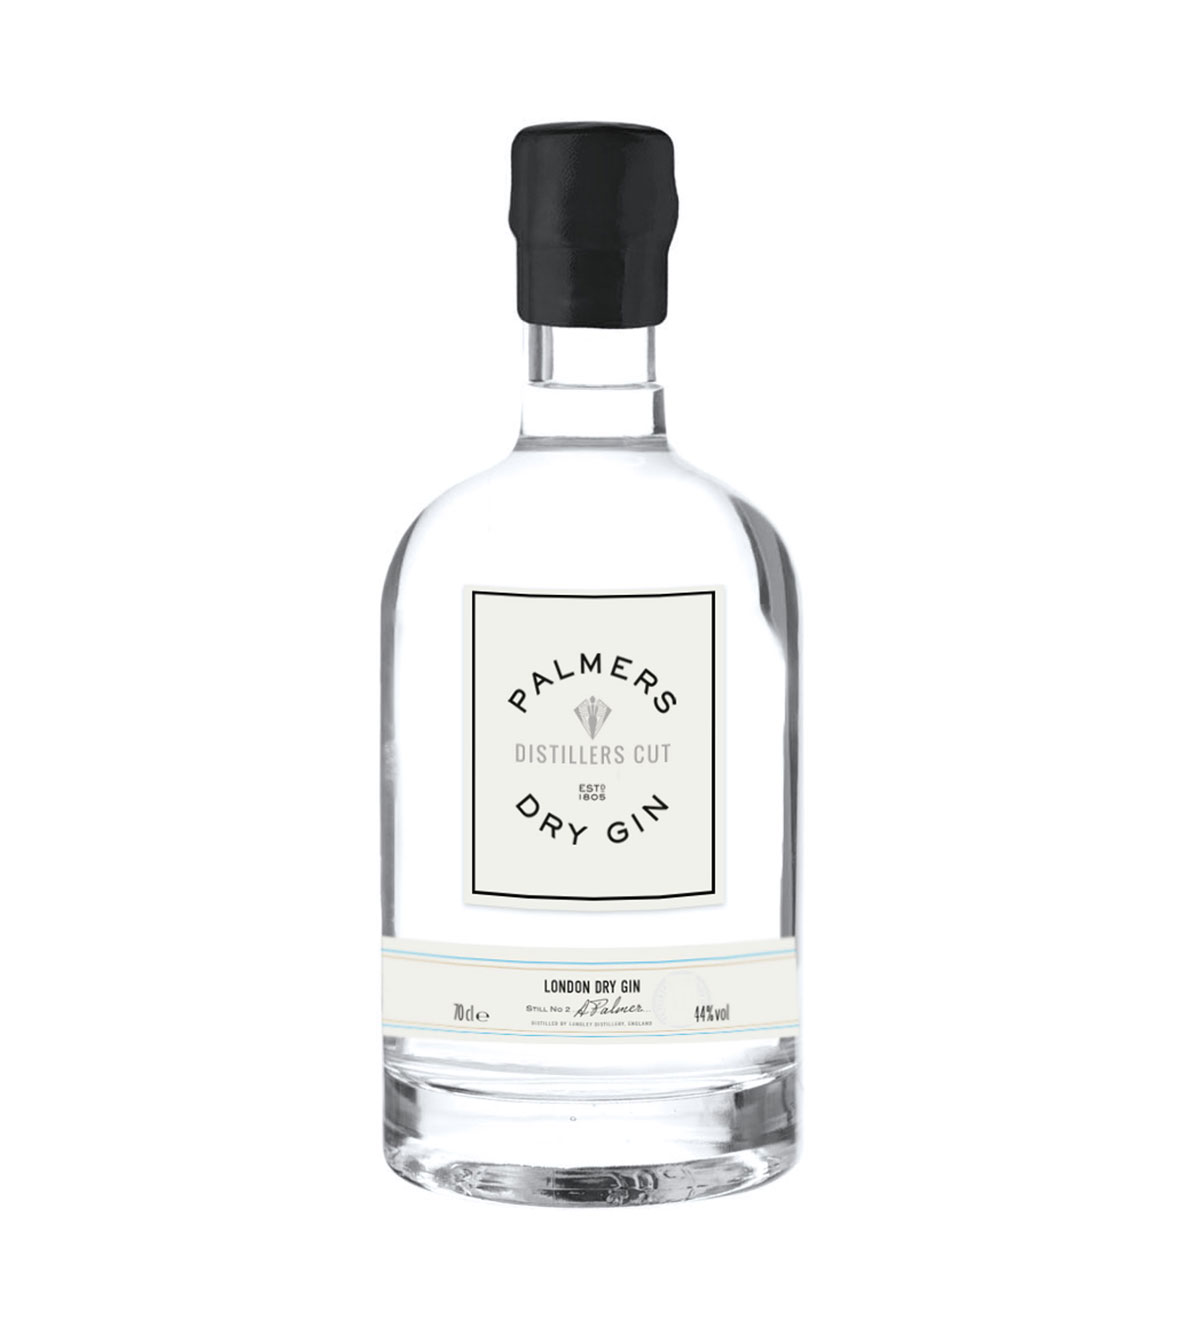 Palmers Distillers Cut Gin - 70cl bottle available to buy online